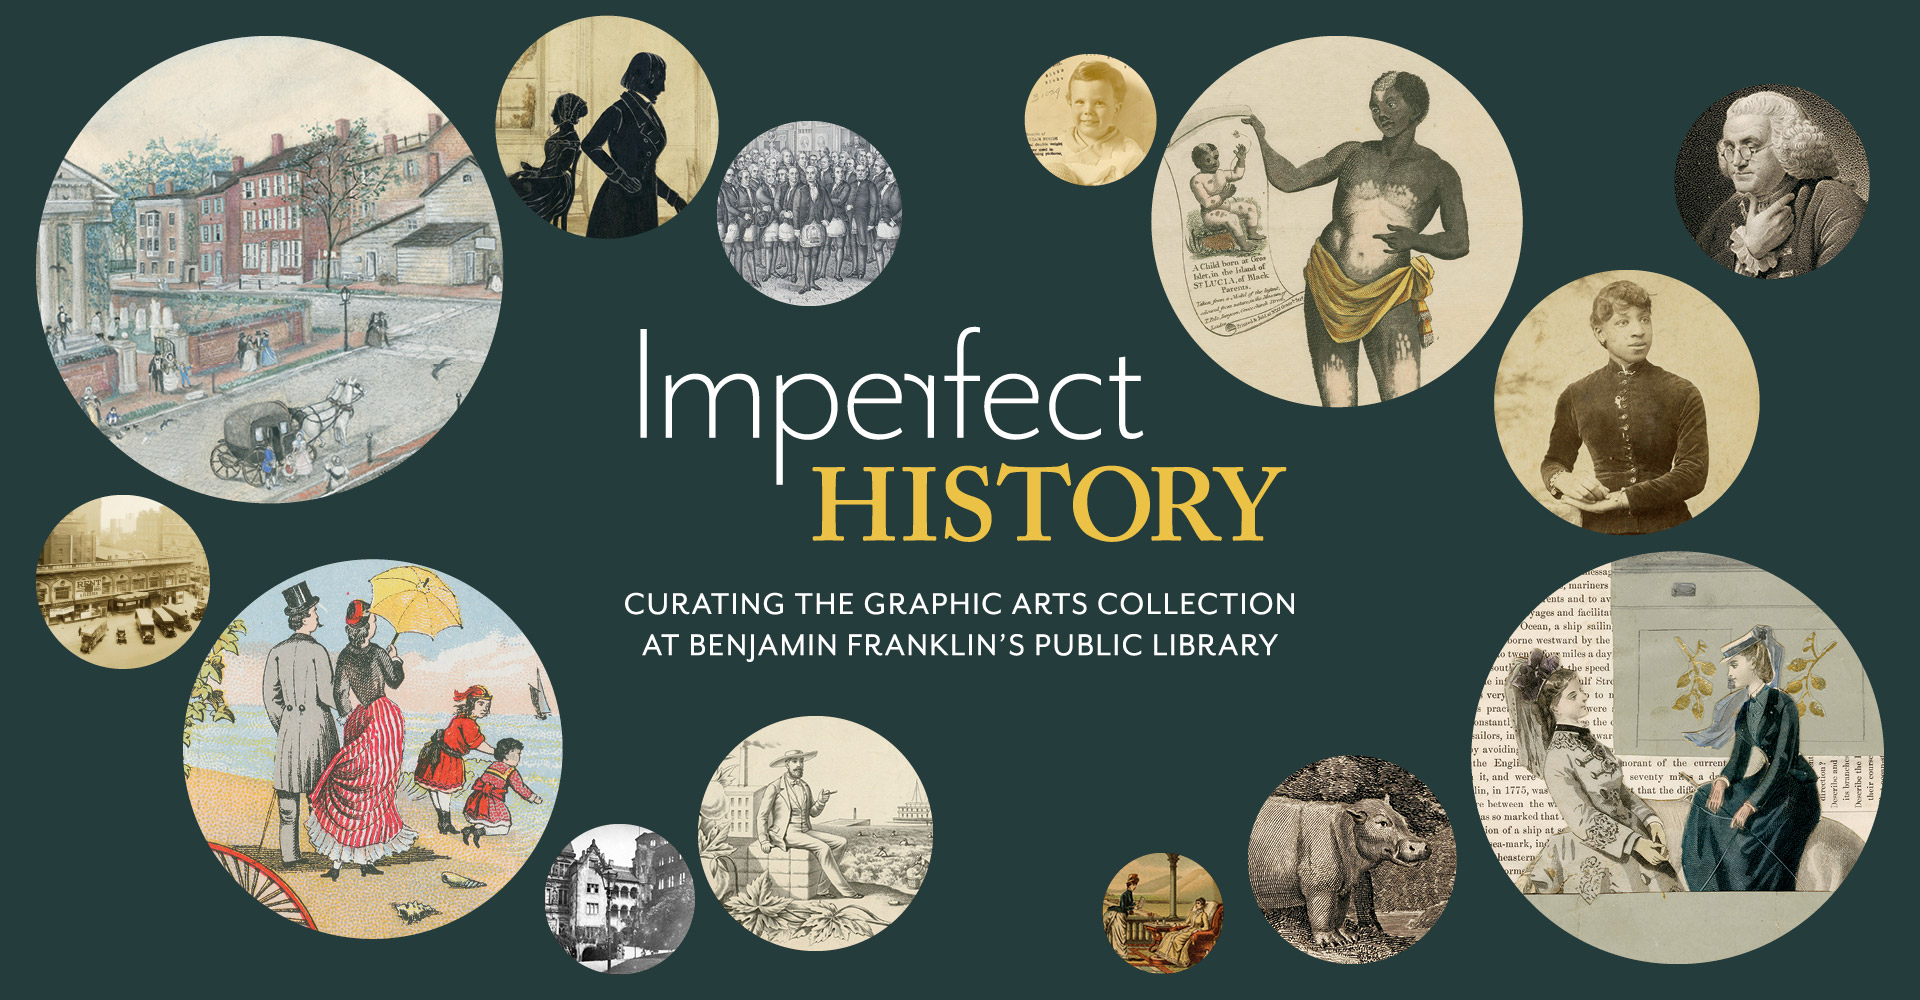 Imperfect History: Curating the graphic arts collection at Benjamin Franklin's public library